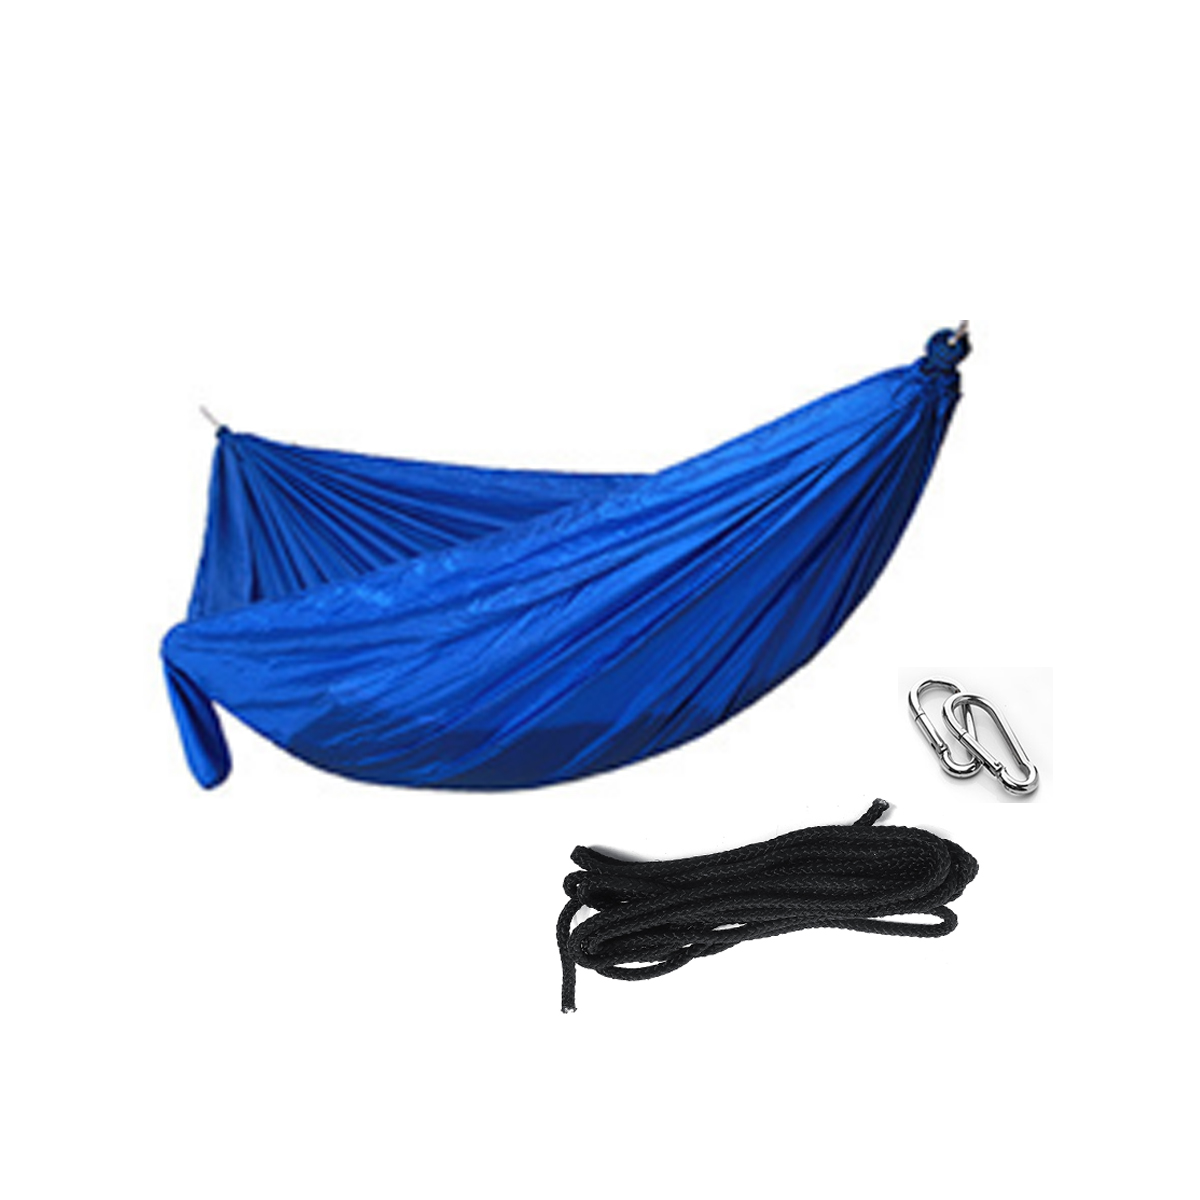 Outdoor-Travel-Double-Person-Hanging-Hammock-Max-Load-200KG-Portable-Camping-Hammock-Bed-1514882-6